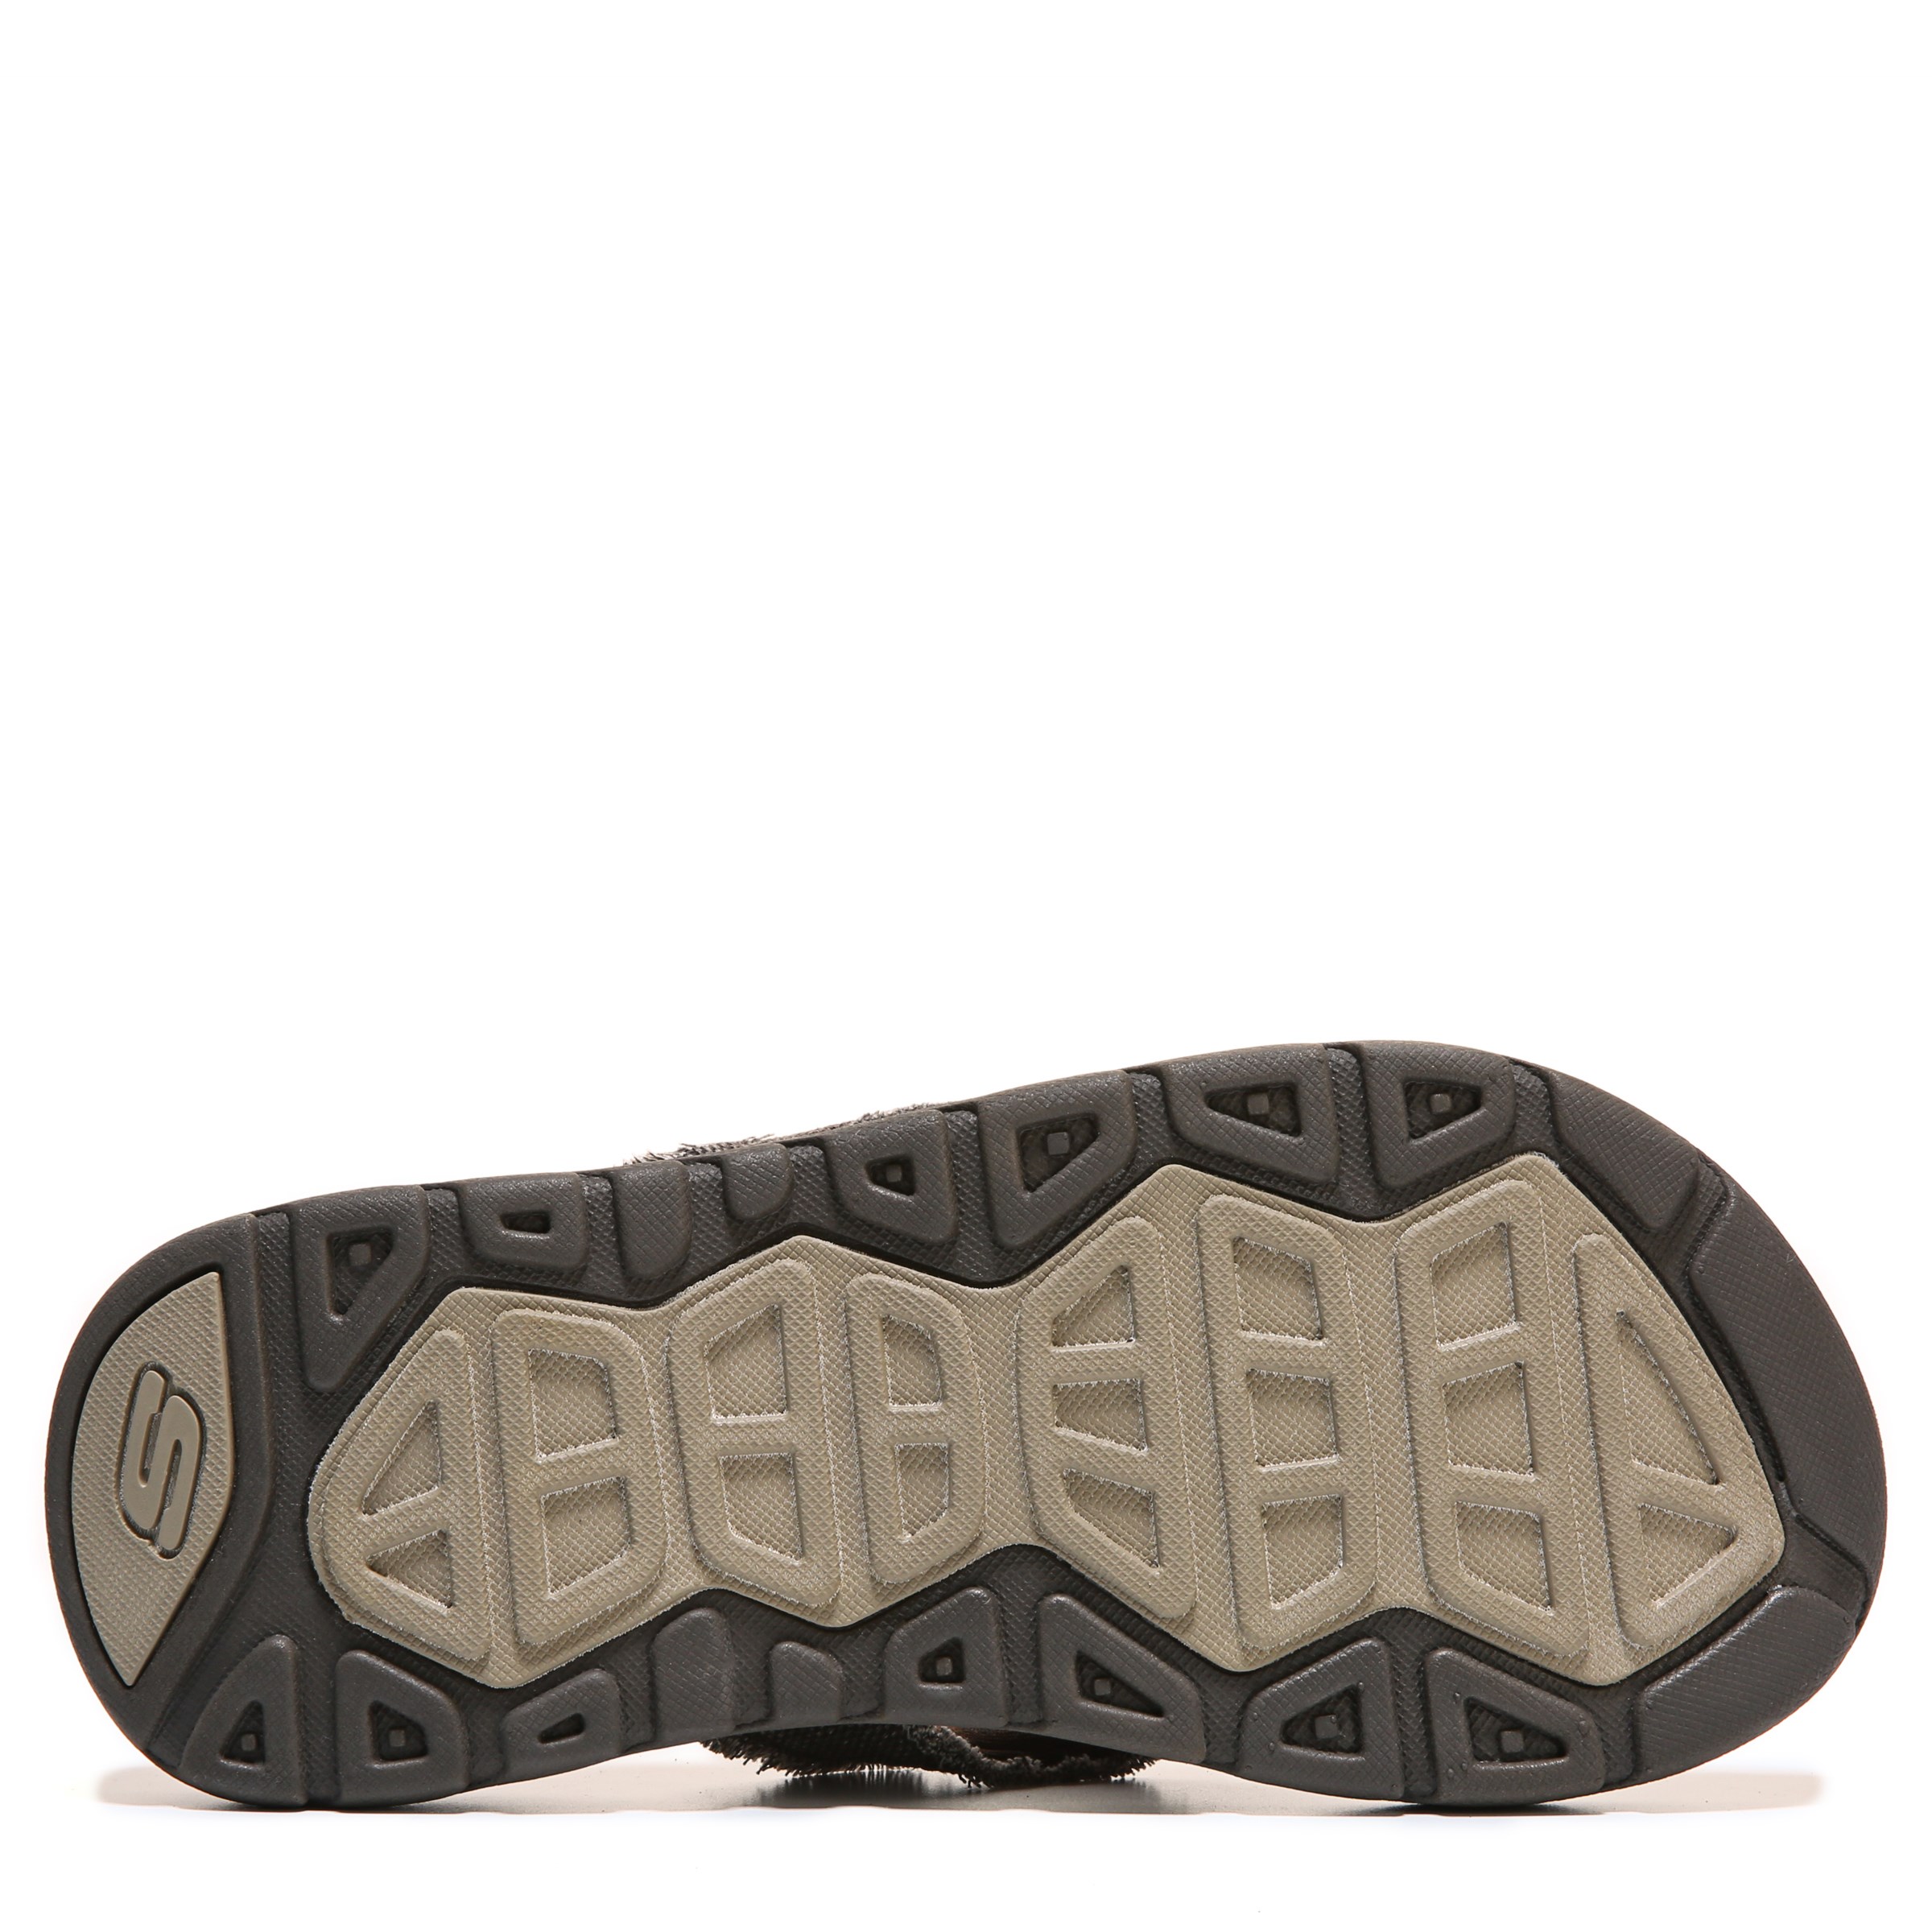 Skechers Men's Relaxed Fit Supreme - Bosnia Thong Sandals from Finish Line  - ShopStyle